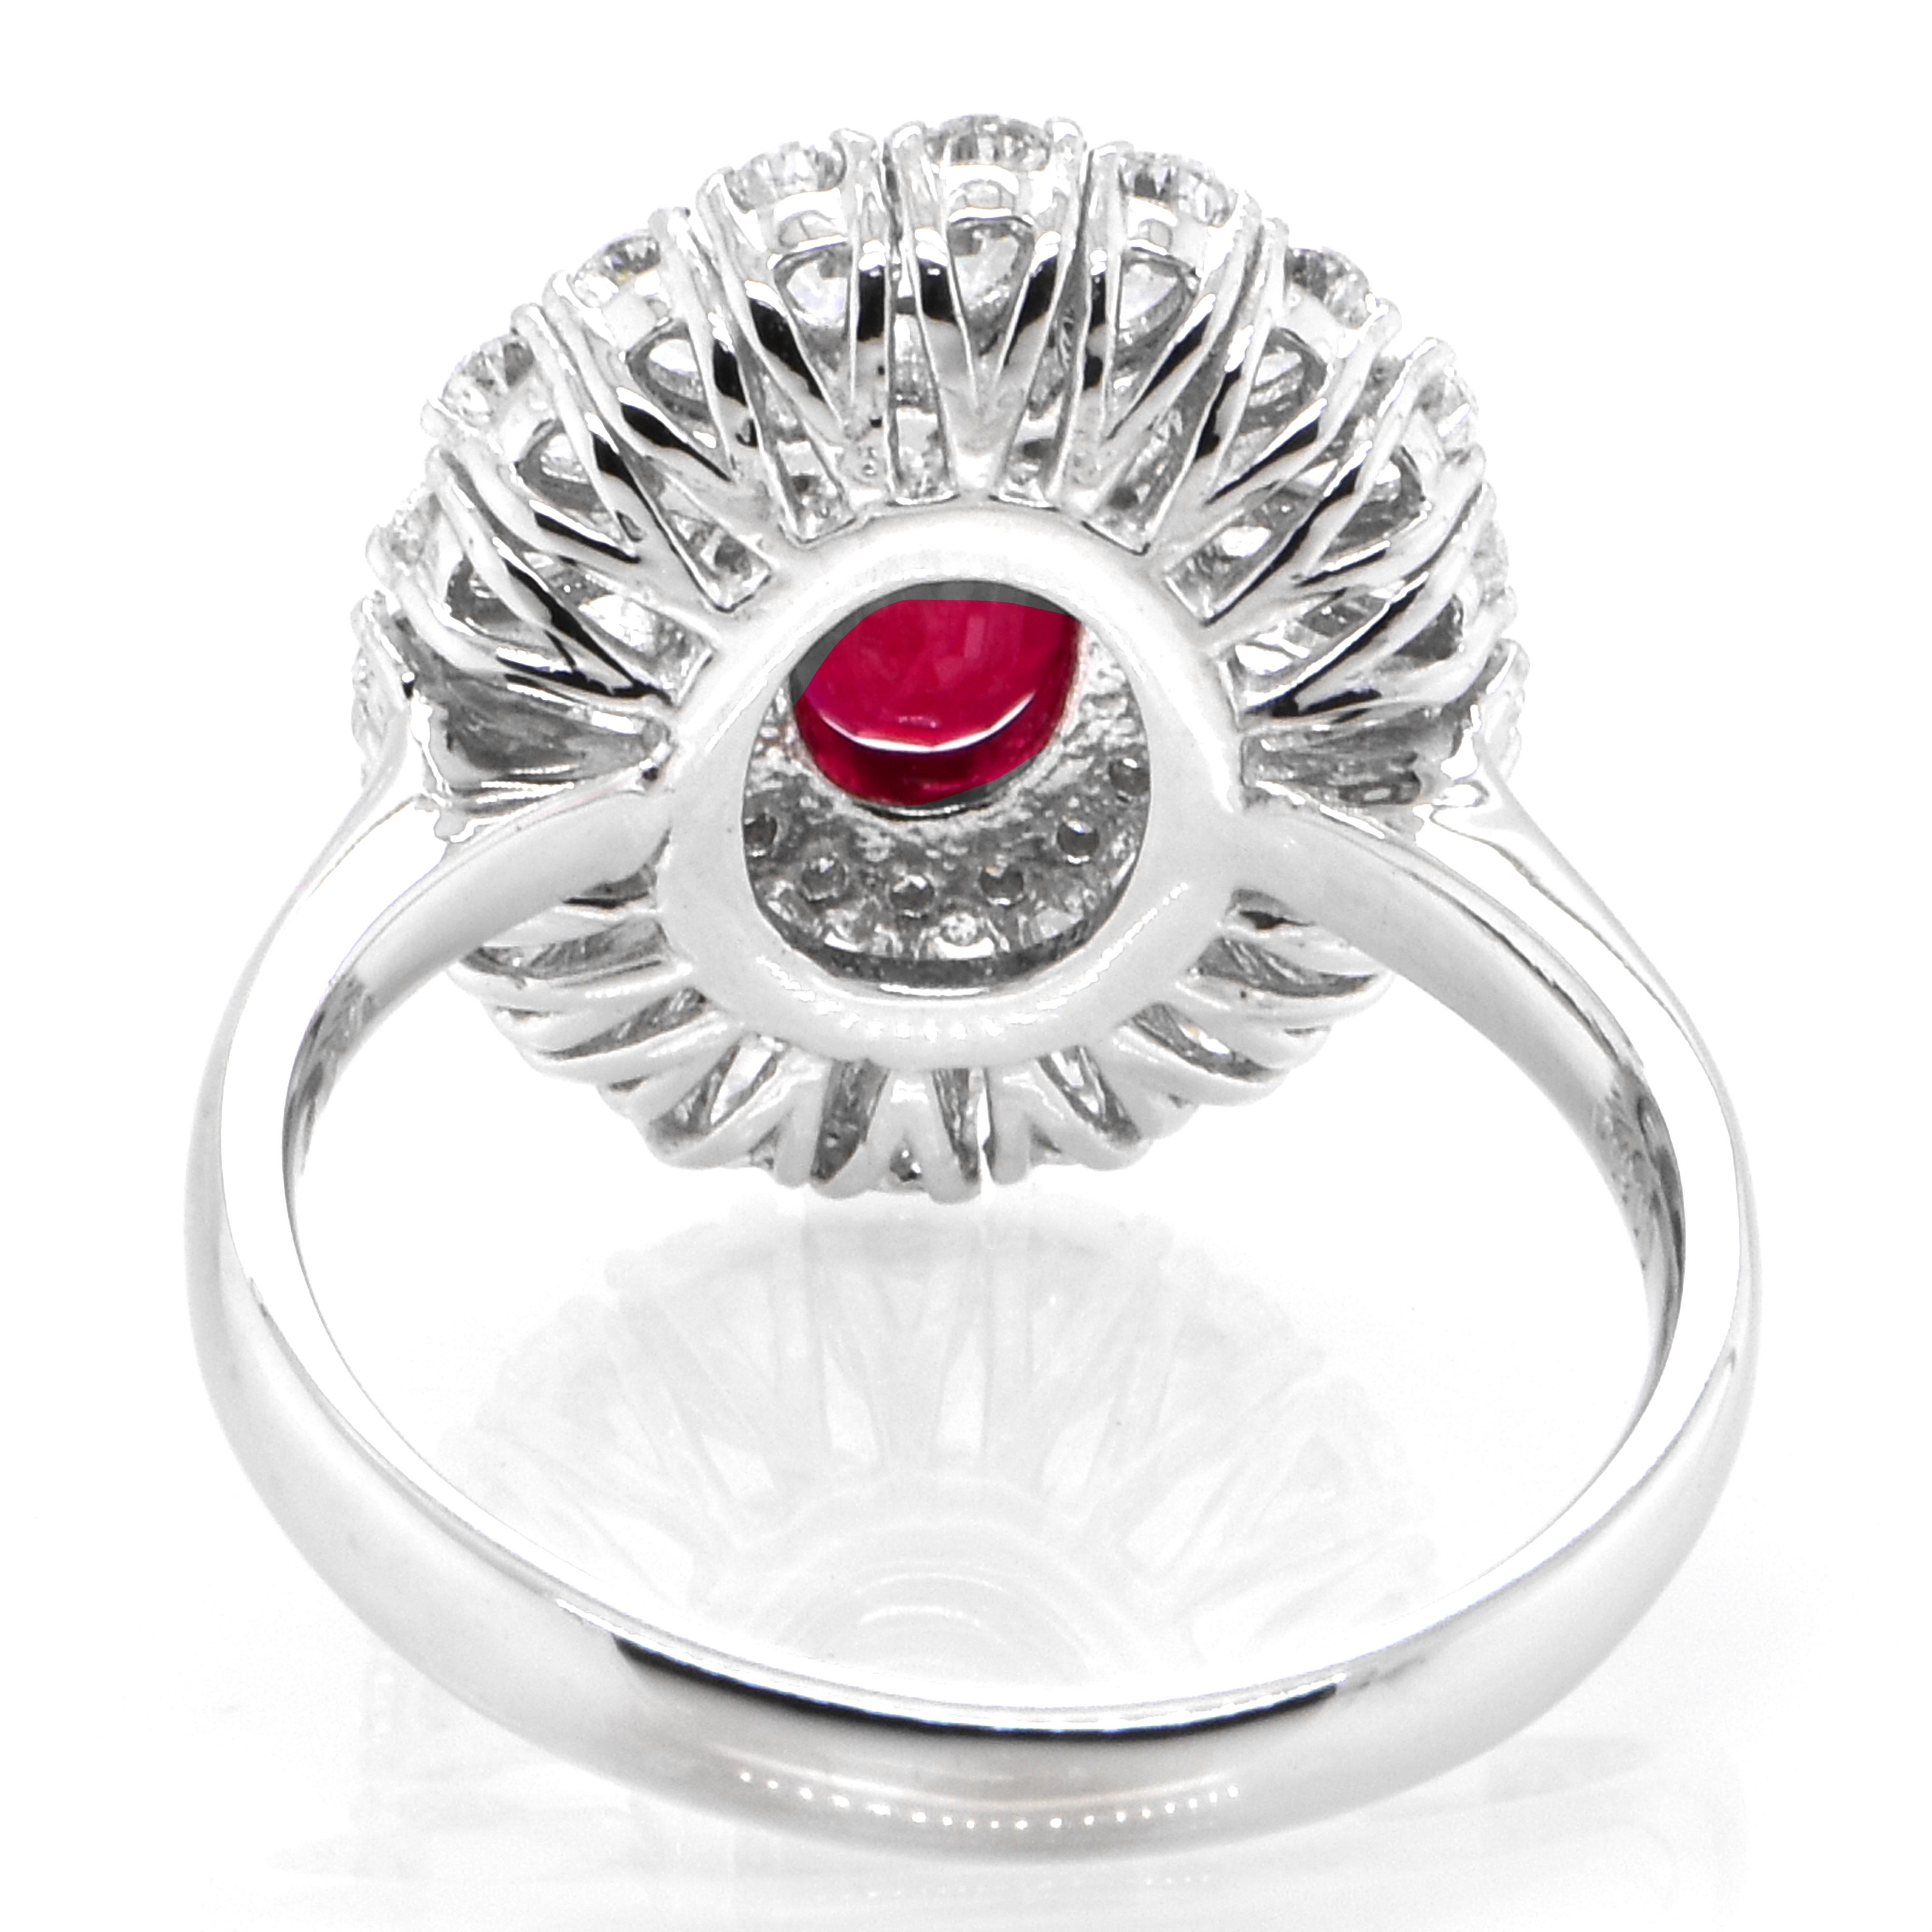 Oval Cut GIA Certified 1.14 Carat, Pigeon Blood Red, Burmese Ruby Ring Made in Platinum For Sale